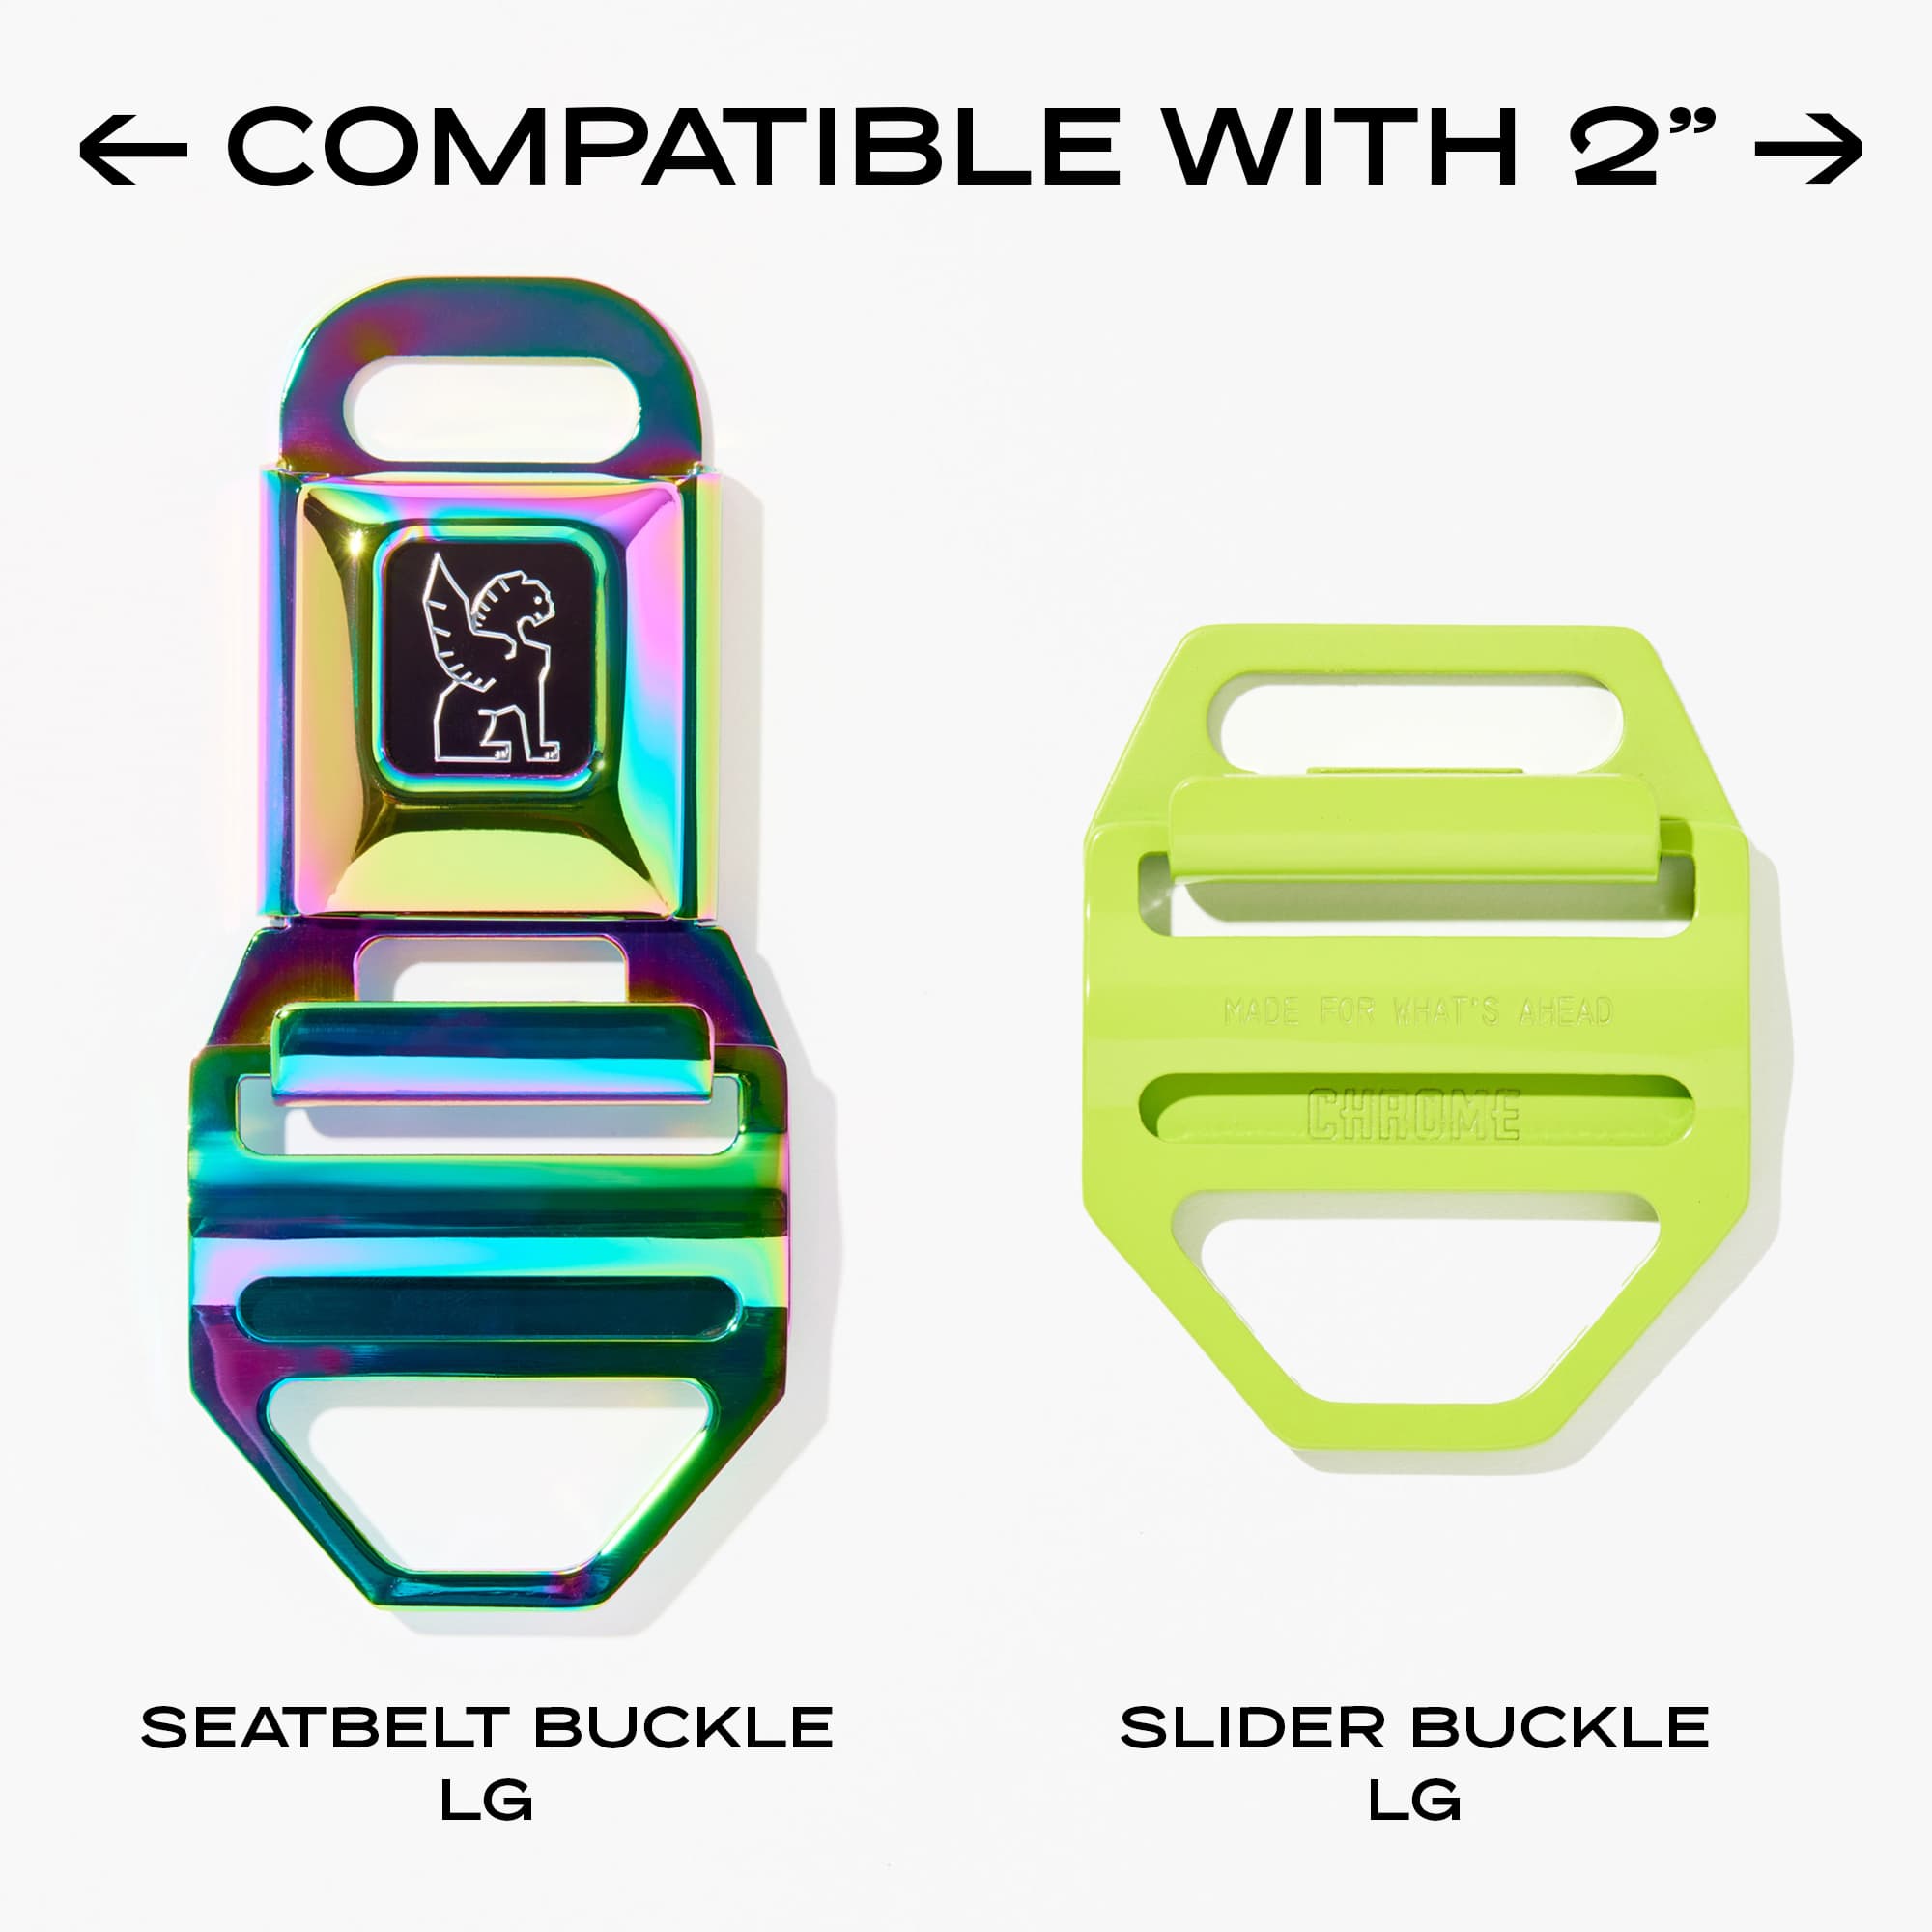 Citizen LTD is compatible with two inch buckles for swapping